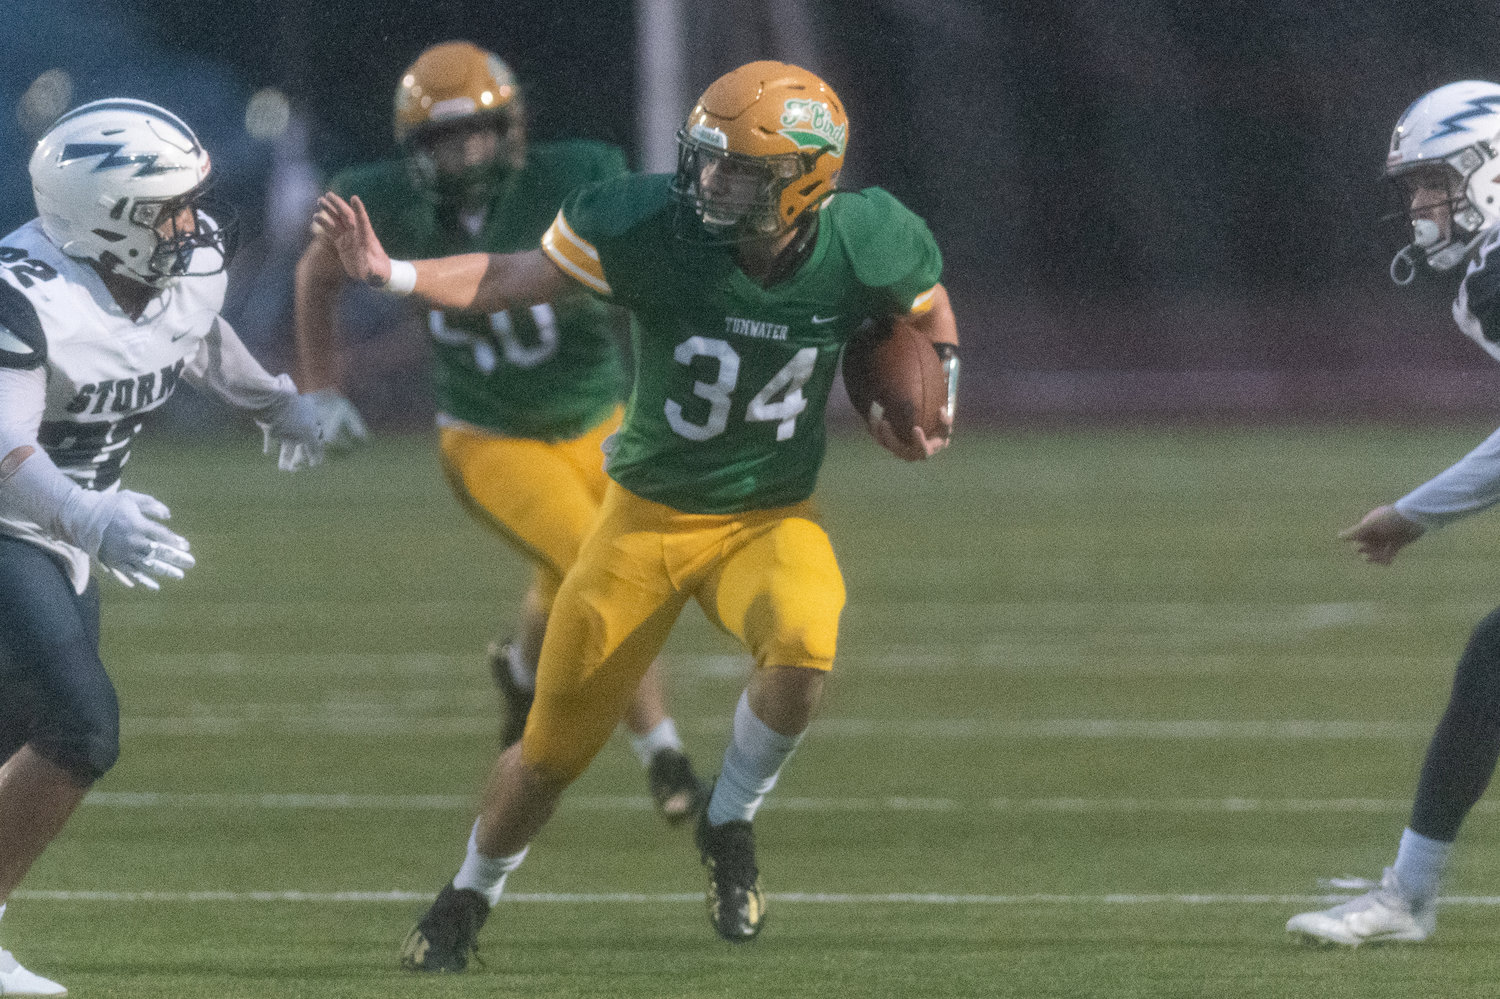 Tumwater tailback Payton Hoyt looks to stiff arm a defender in the 2A state semifinals against Squalicum Nov. 27.